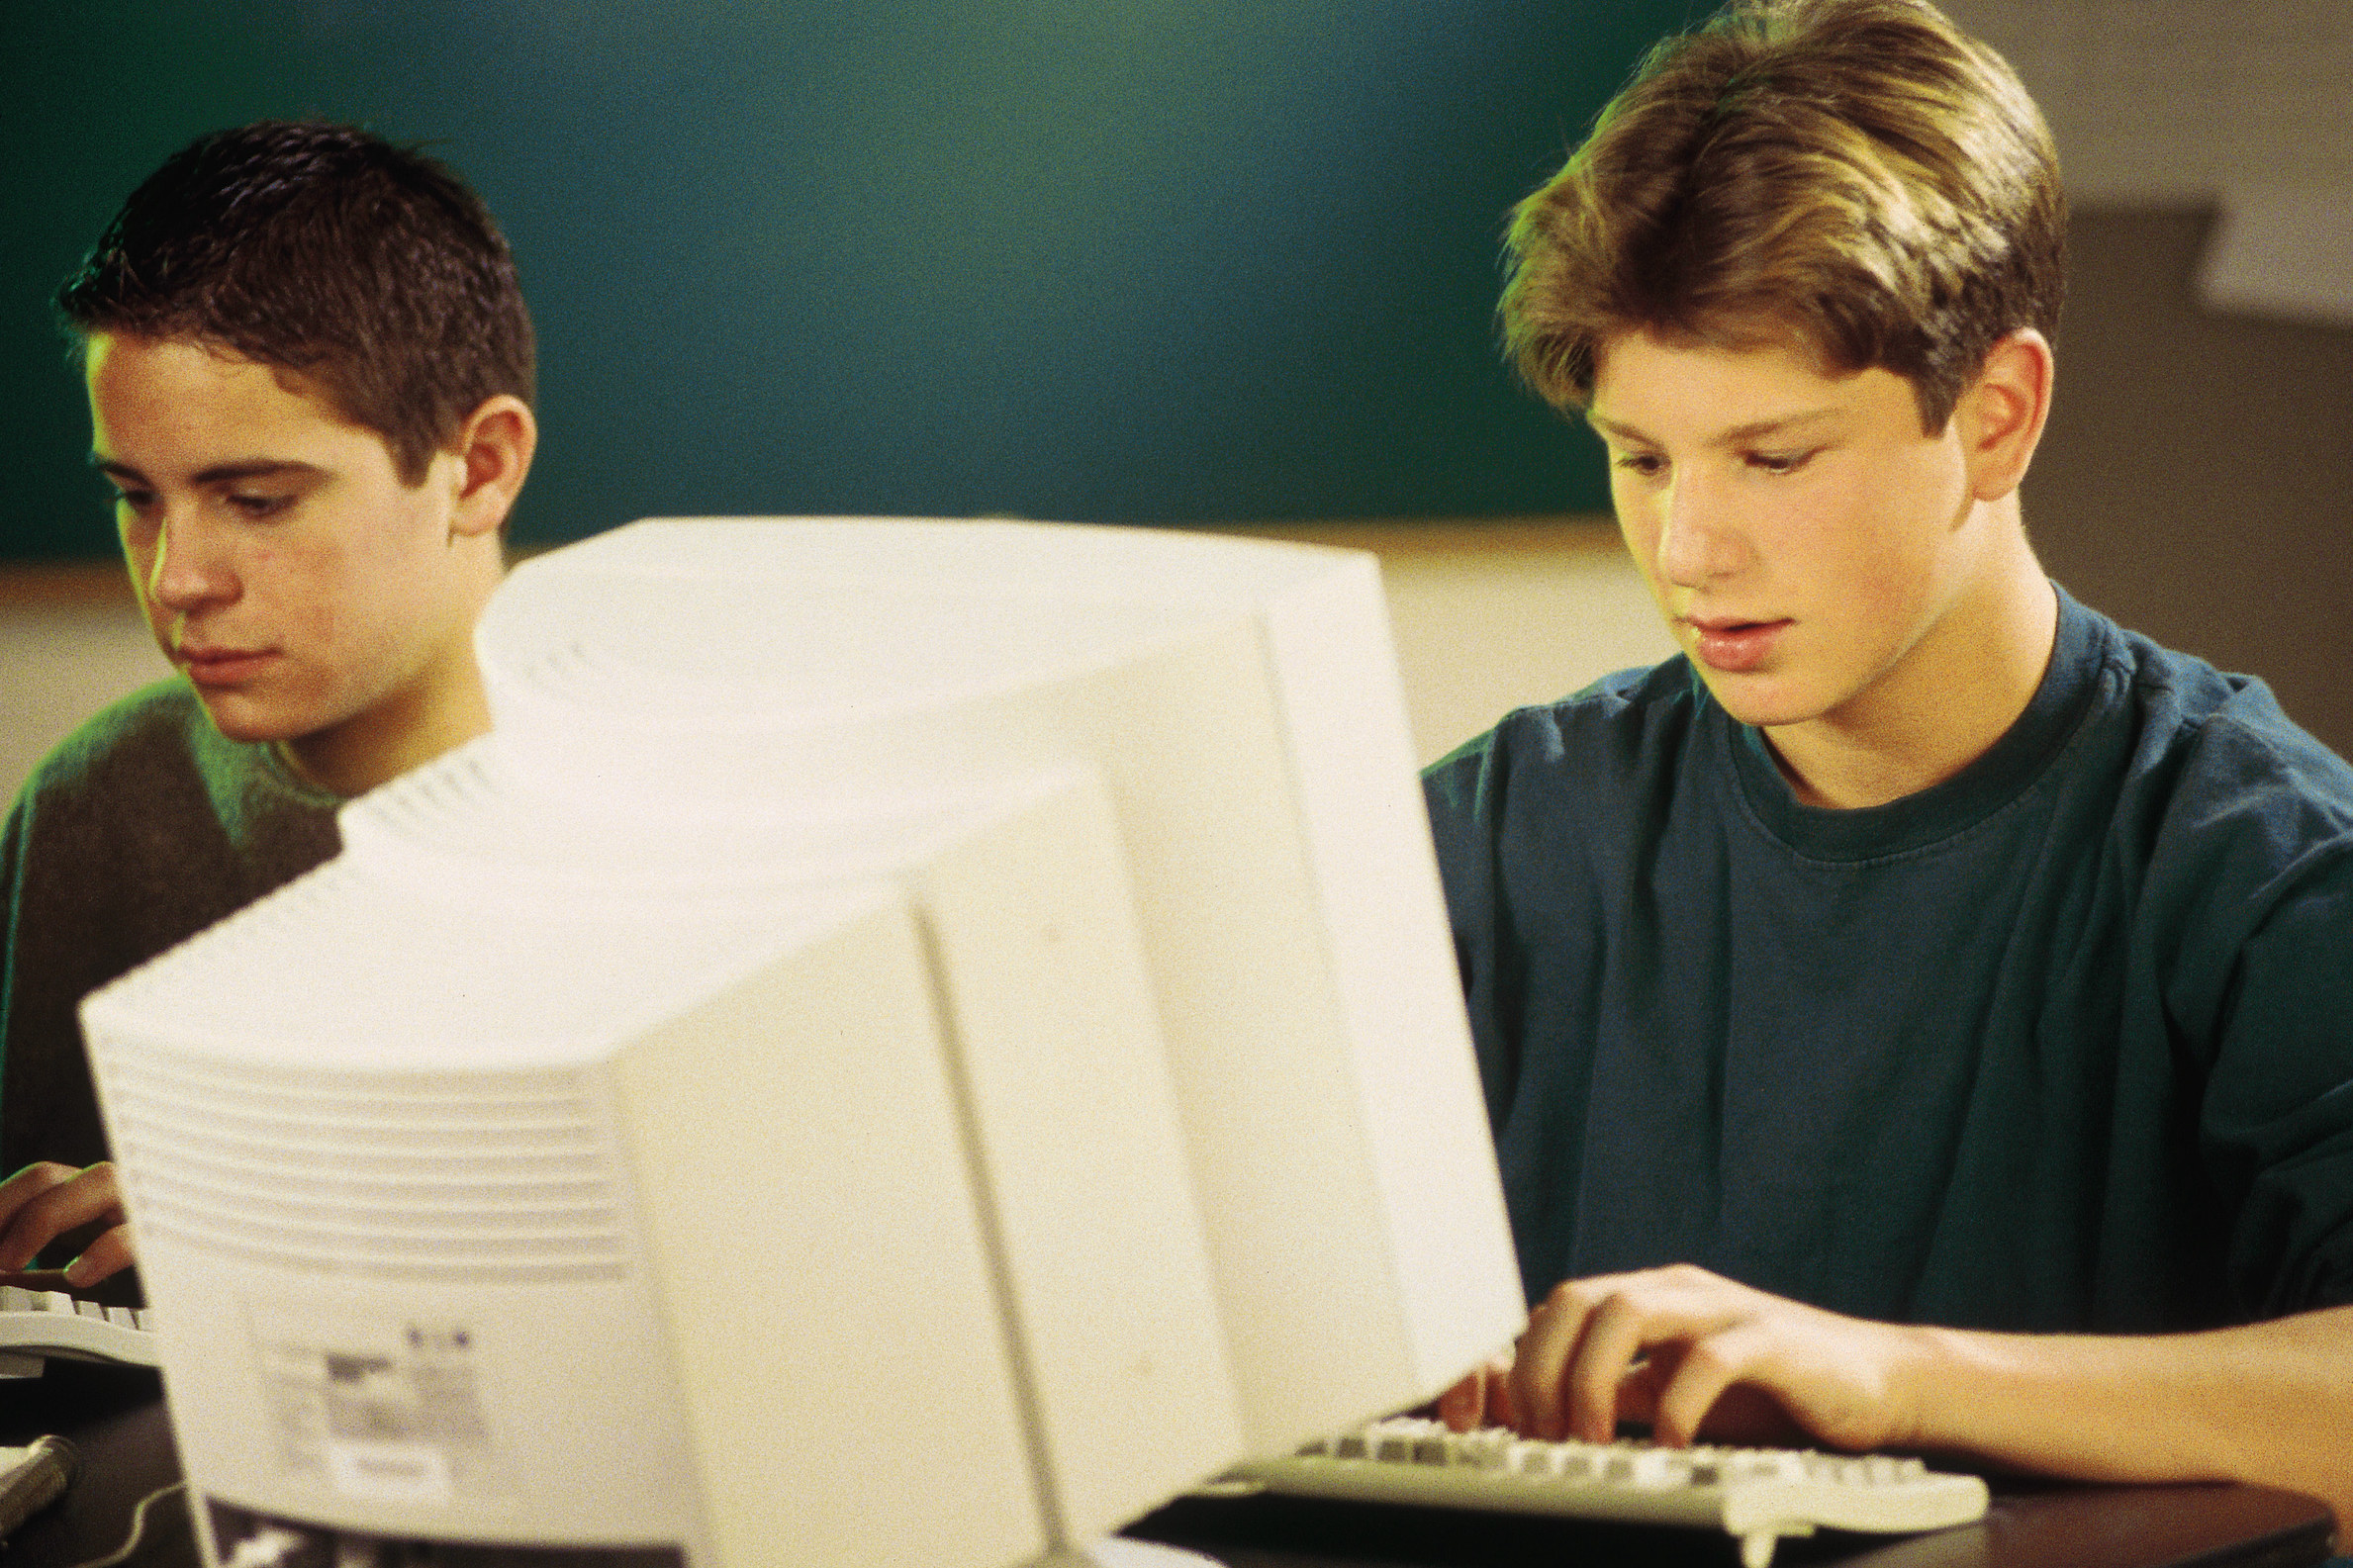 Two boys at a computer